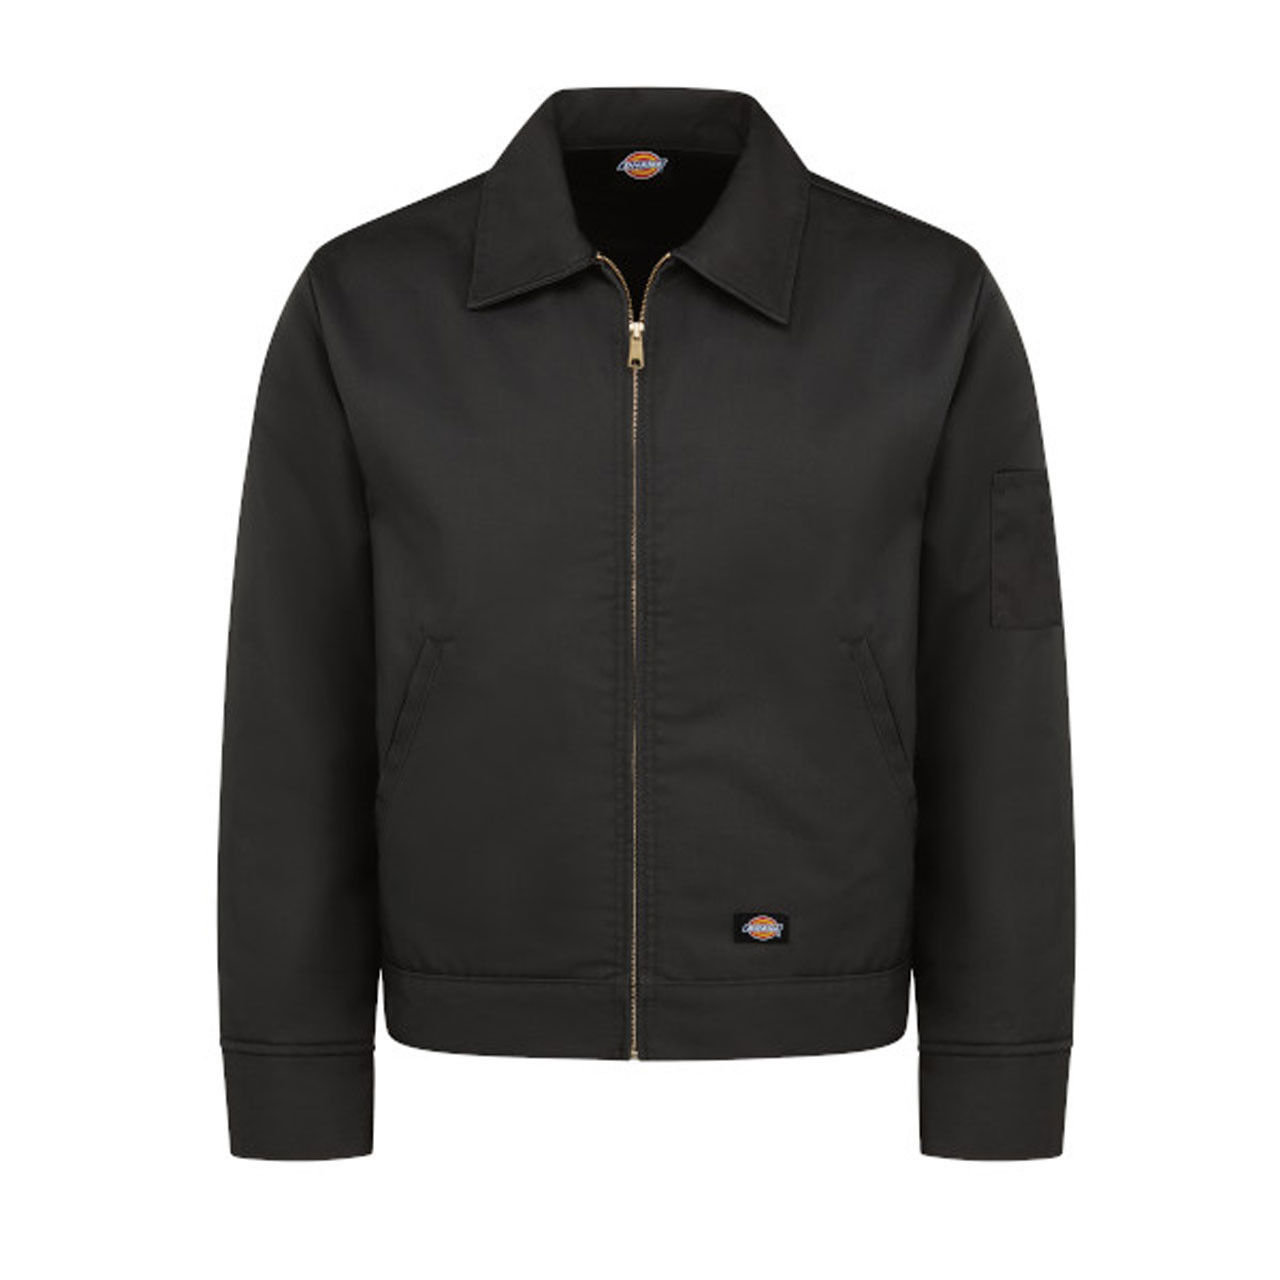 What is the insulation in this black Dickies jacket?